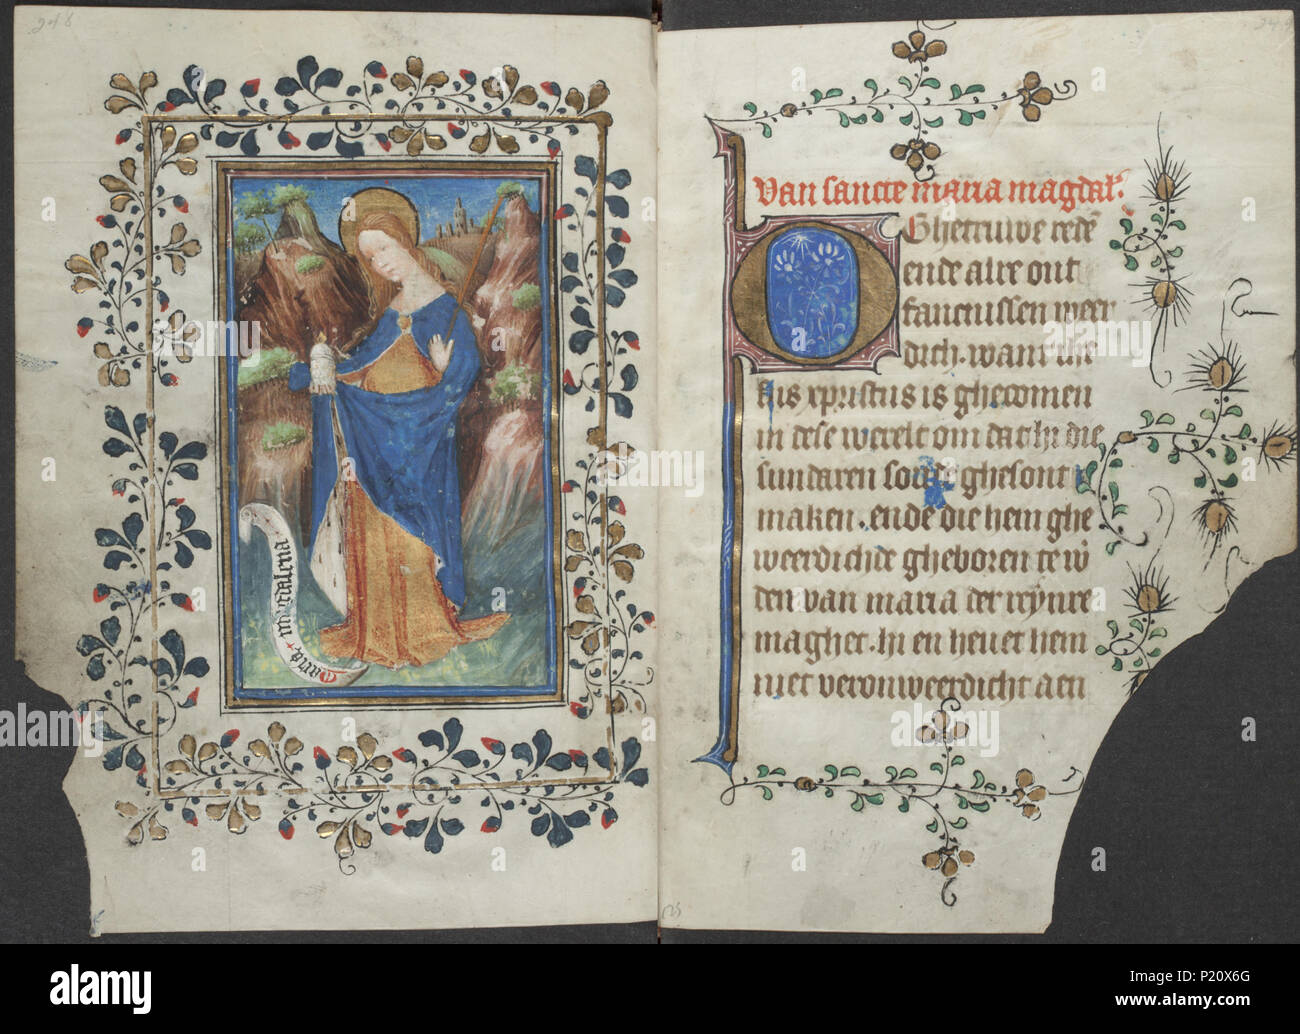 . Book of hours by the Master of Zweder van Culemborg - KB 79 K 2 - folios 124v (left) and 125r (right) .  Lefthand side folio 124v and righthand side folio 125r from the Book of hours by the Master(s) of Zweder van Culemborg Illuminations on the left folio 124v The full-page miniature shows St. Mary Magdalene holding a palm and a jar of ointment The penitent harlot mary magdalene; possible attributes: book (or scroll), crown, crown of thorns, crucifix, jar of ointment, mirror, musical instrument, palm-branch, rosary, scourge (MAGDALENE) 11HH(MARY MAGDALENE)) Trees: palm-tree (+ branch, stick) Stock Photo